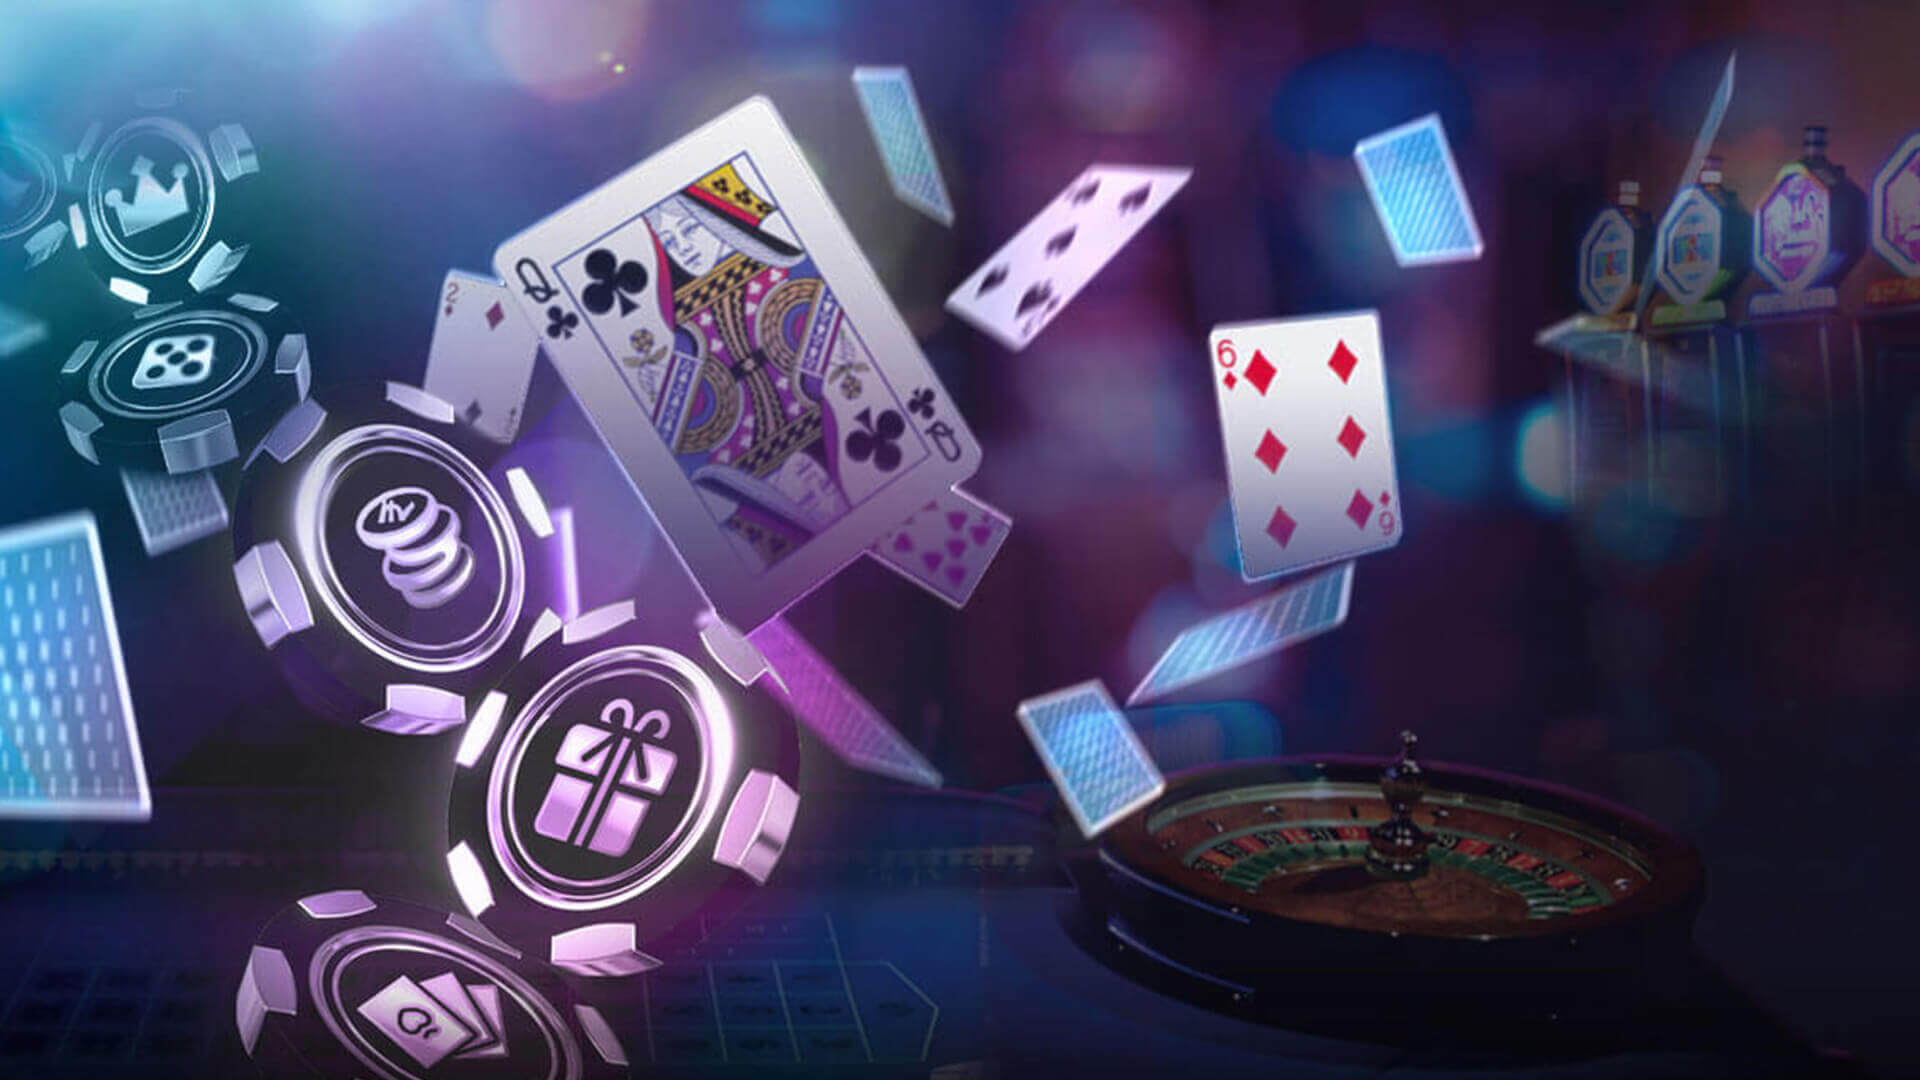 Get the information you need on the Online Gambling website